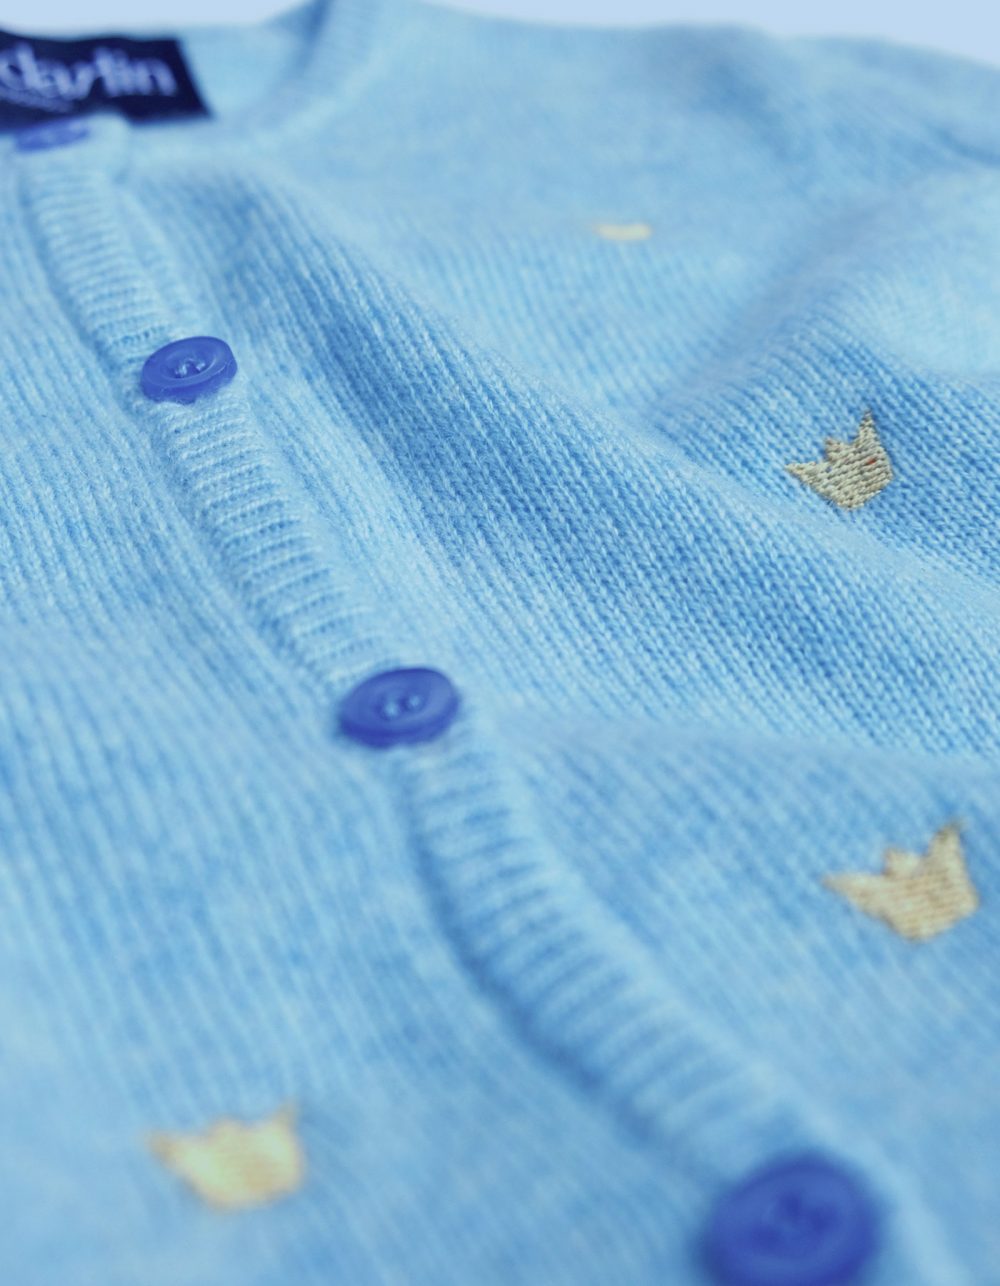 Close up of the malin darlin designer baby cardigan showing button and cashmere knit detail.